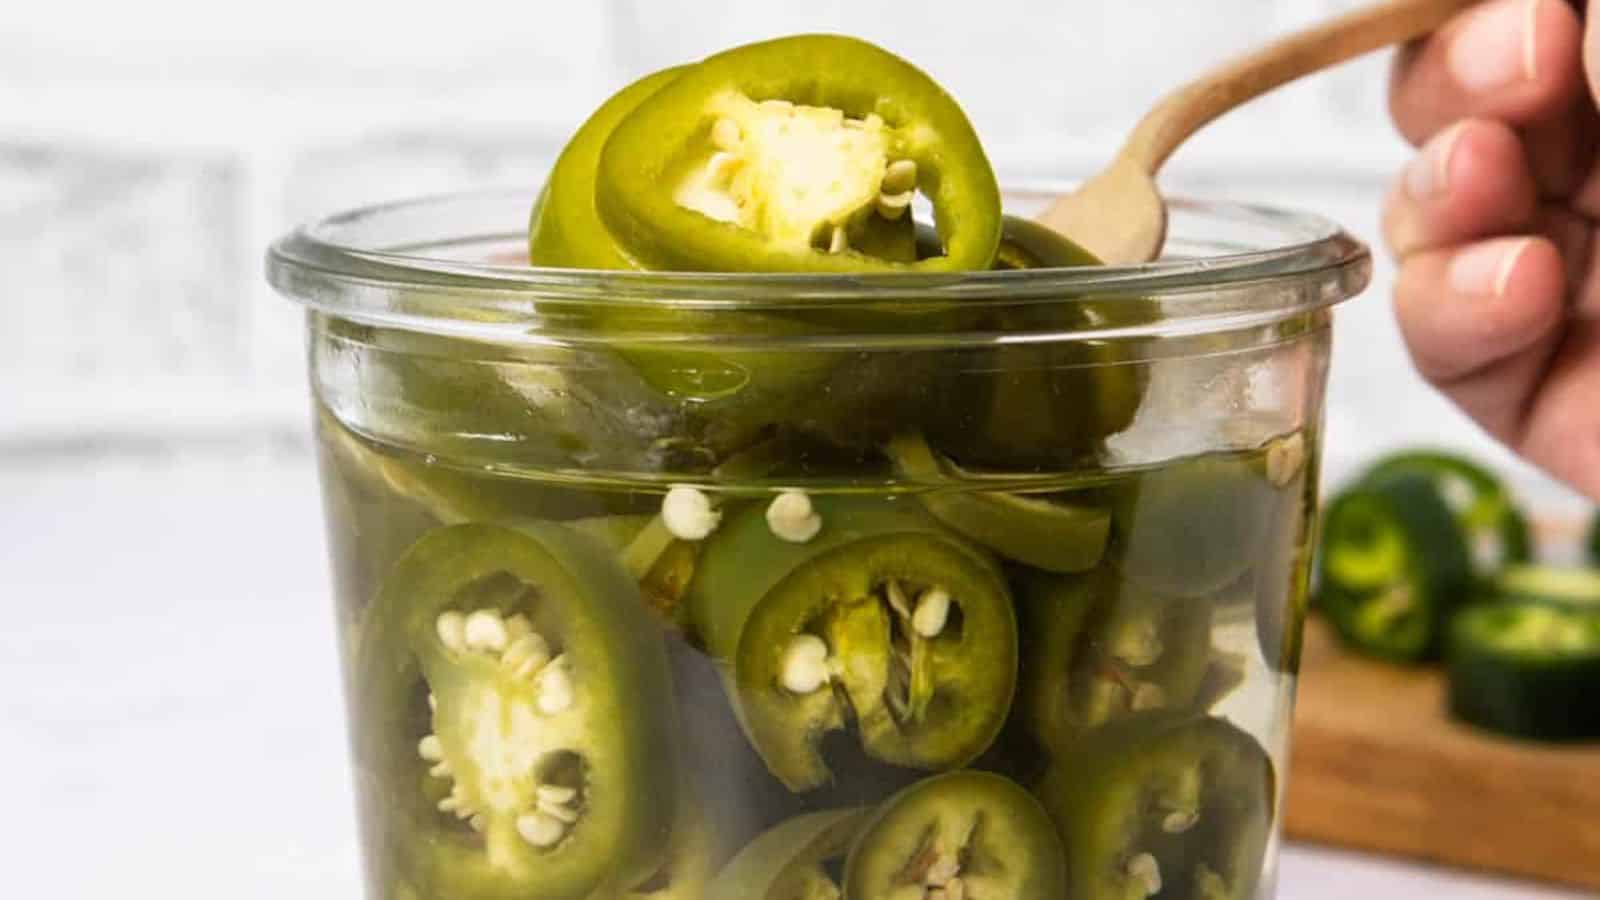 A close-up image of pickled jalapenos in a glass jar being scooped with a fork.